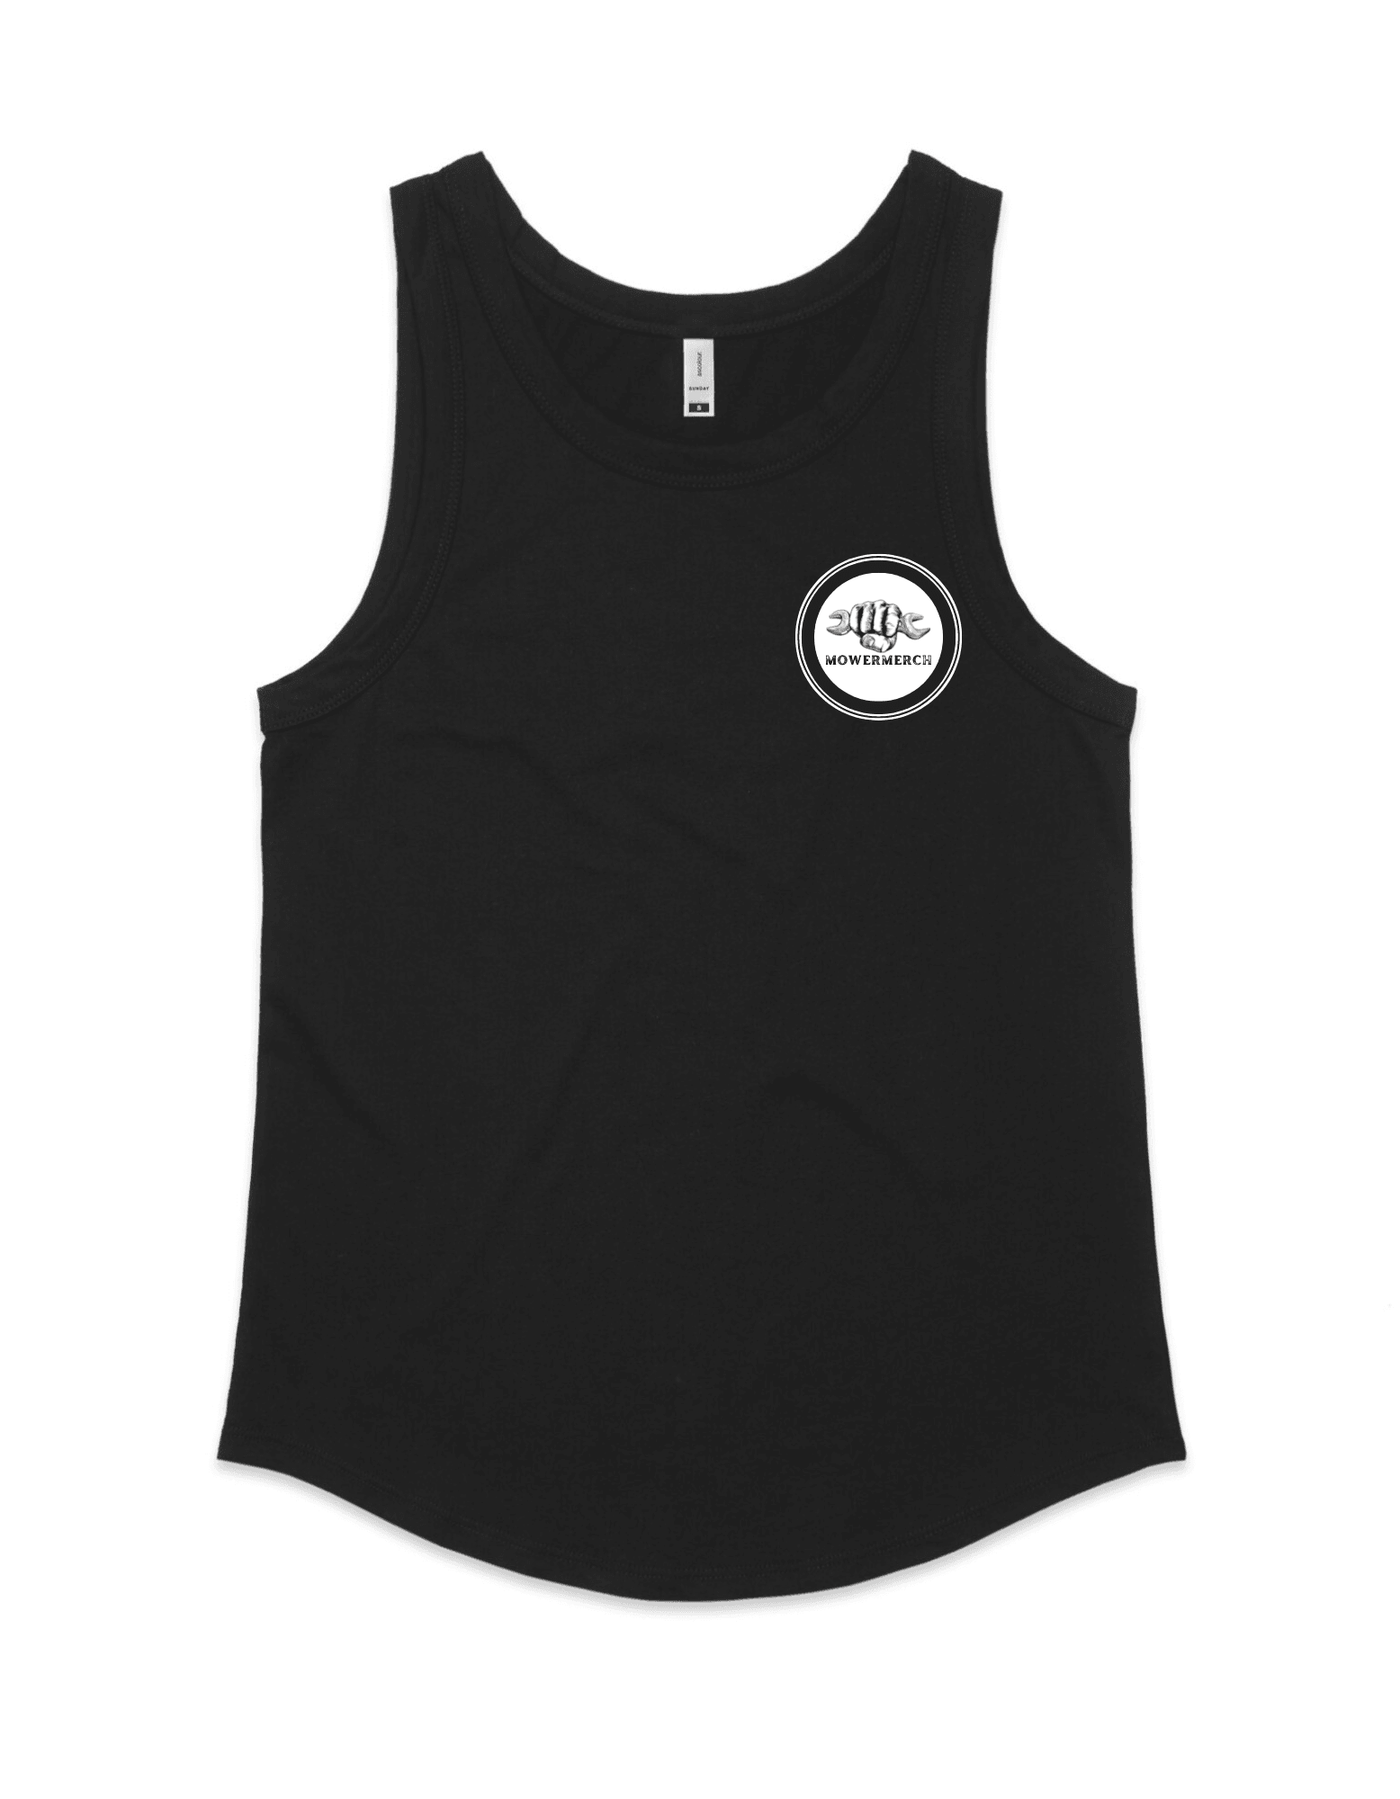 Womens Mowermerch Singlet - Mowermerch More spare parts for all your power equipment needs available. From mower spare parts to all other power equipment spare parts we have them all. If your gardening equipment needs new spare parts, check us out!